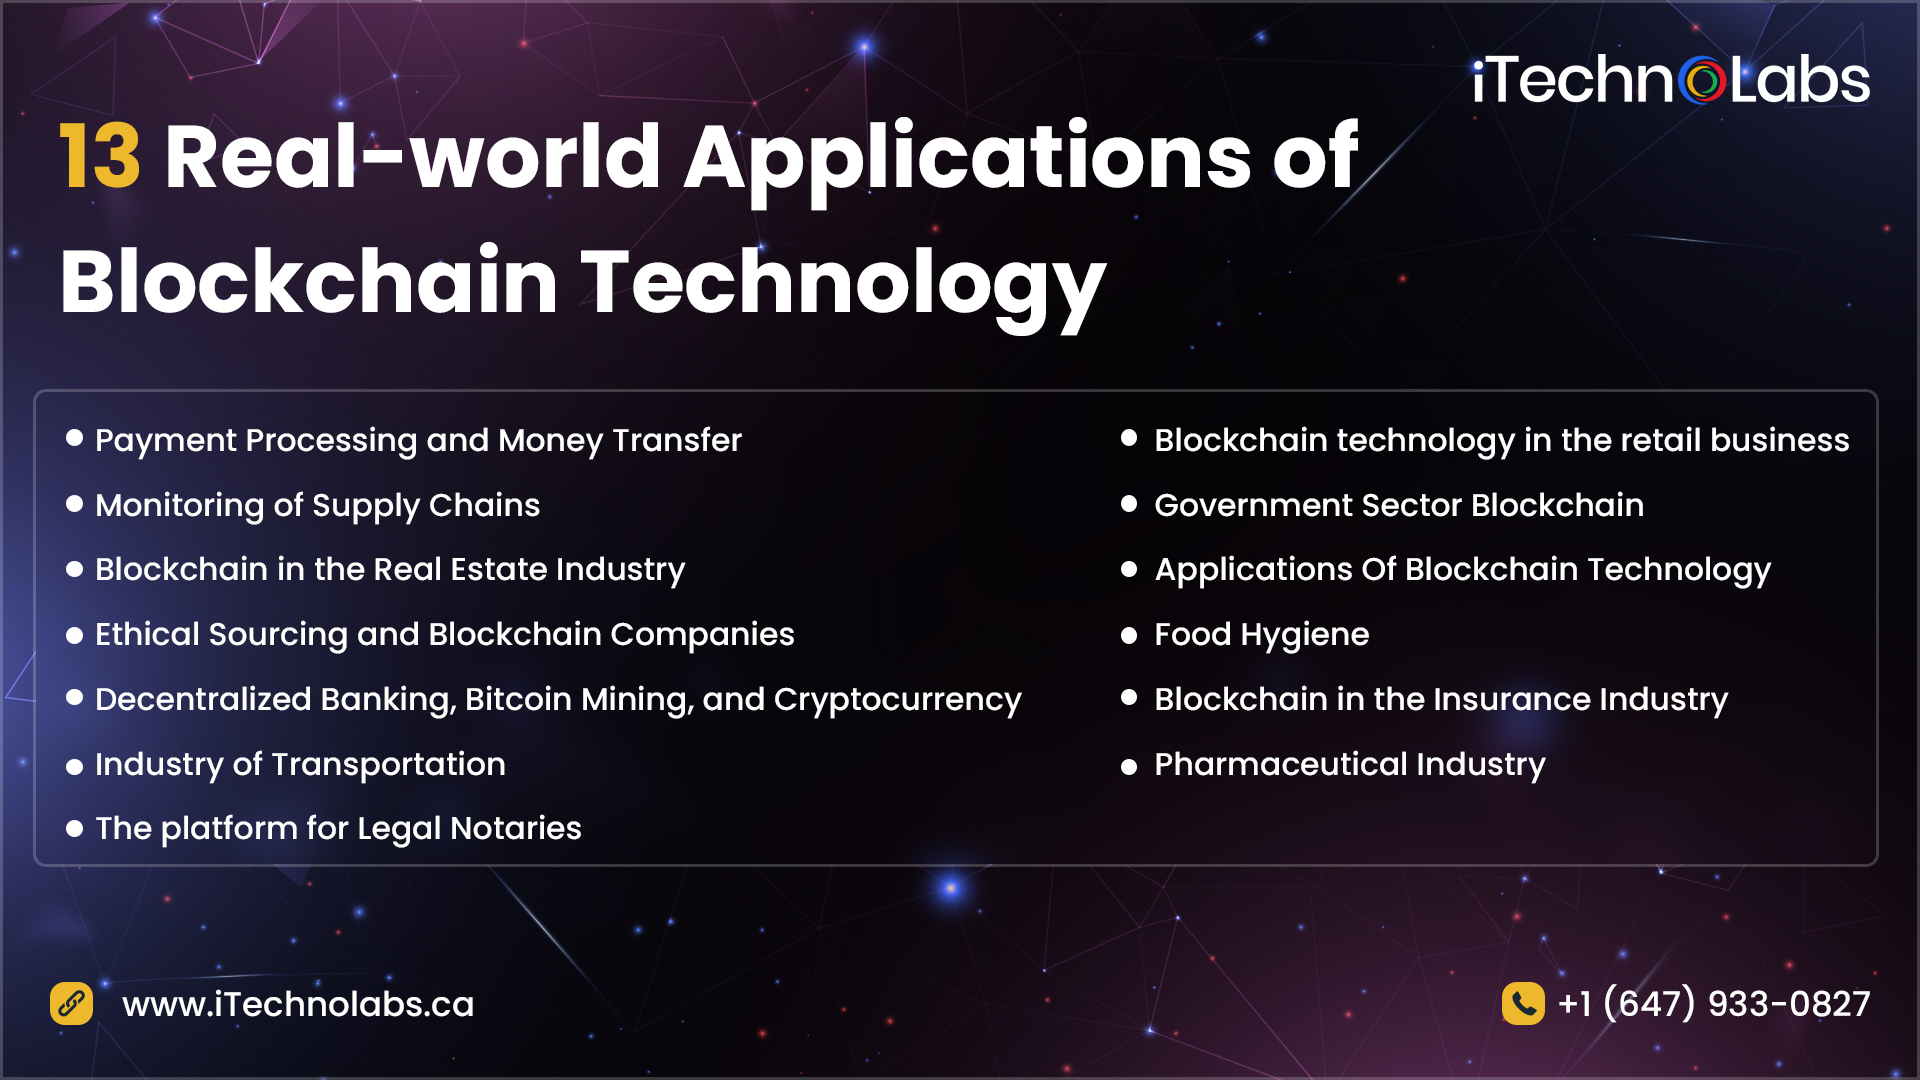 13 real-world applications of blockchain technology itechnolabs